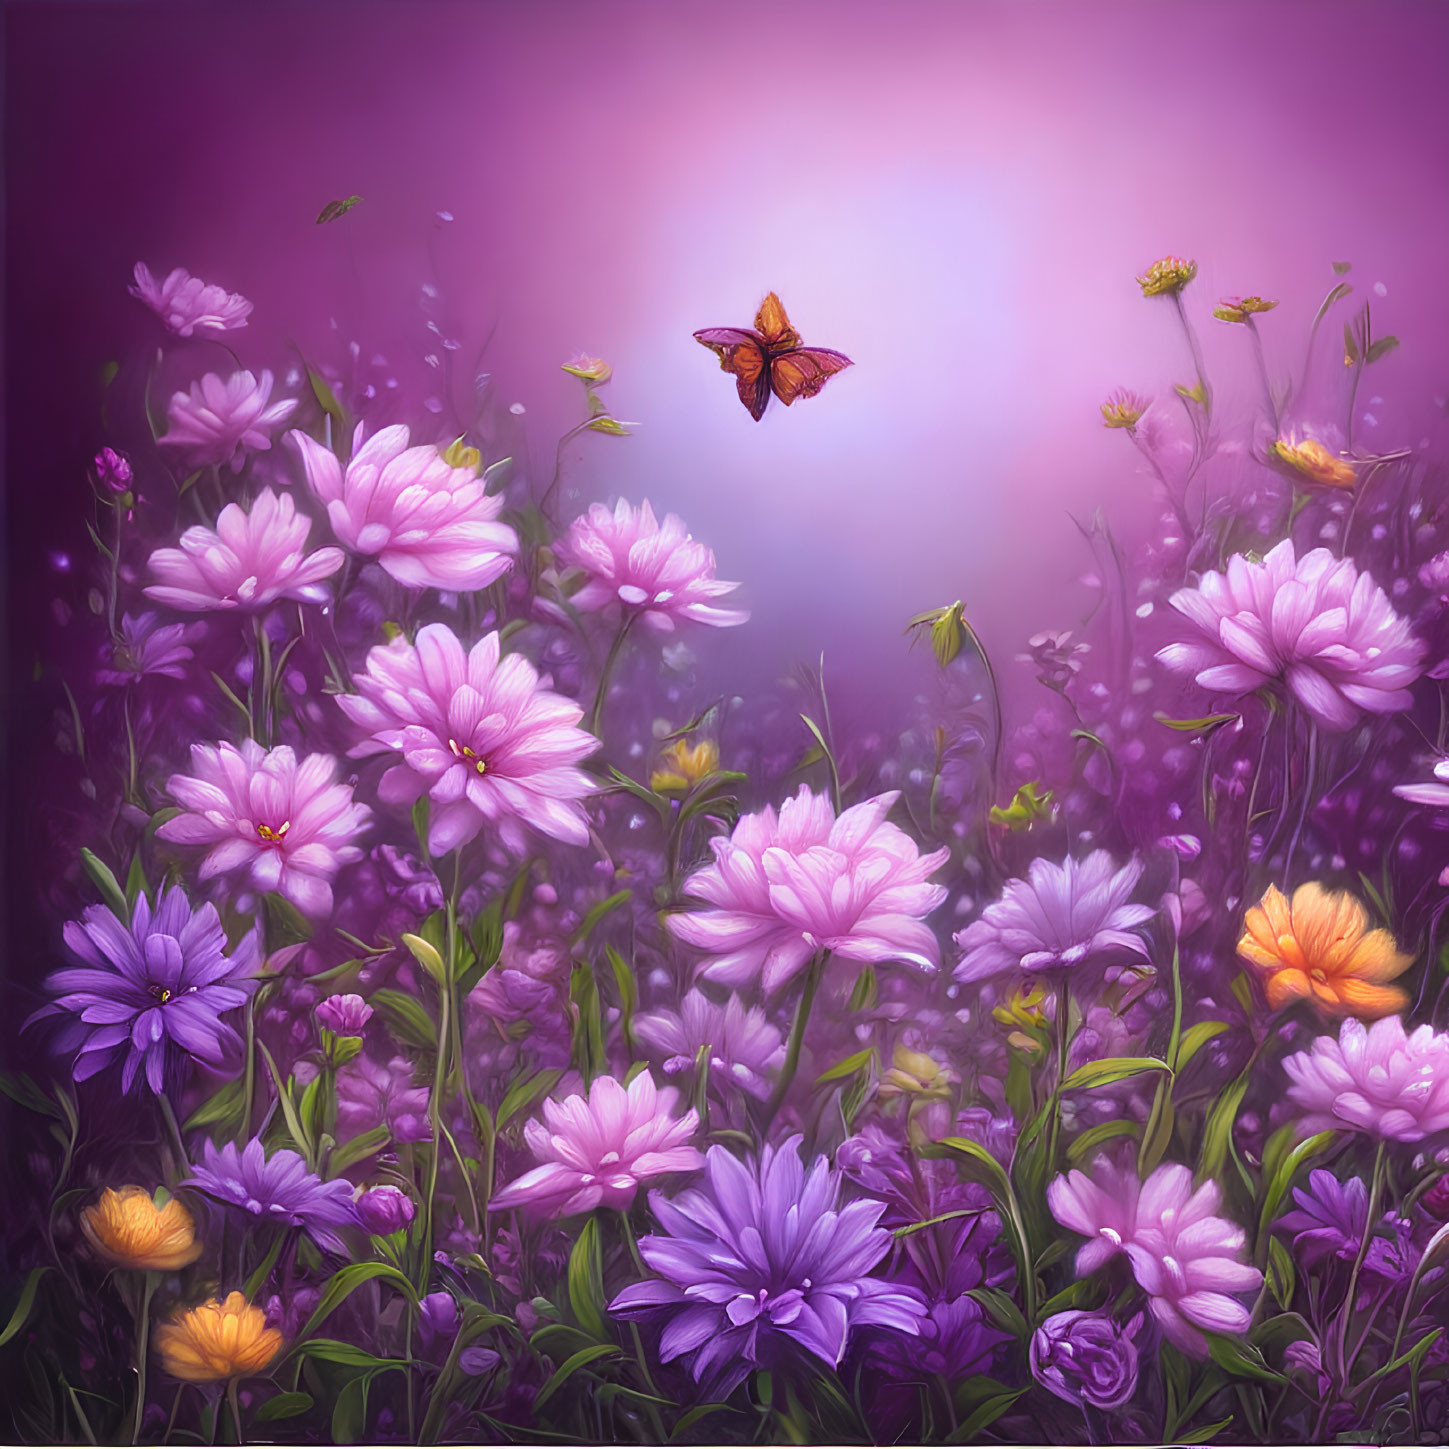 Purple flowers in full bloom with soft focus and a butterfly in flight in a mystical purple glow